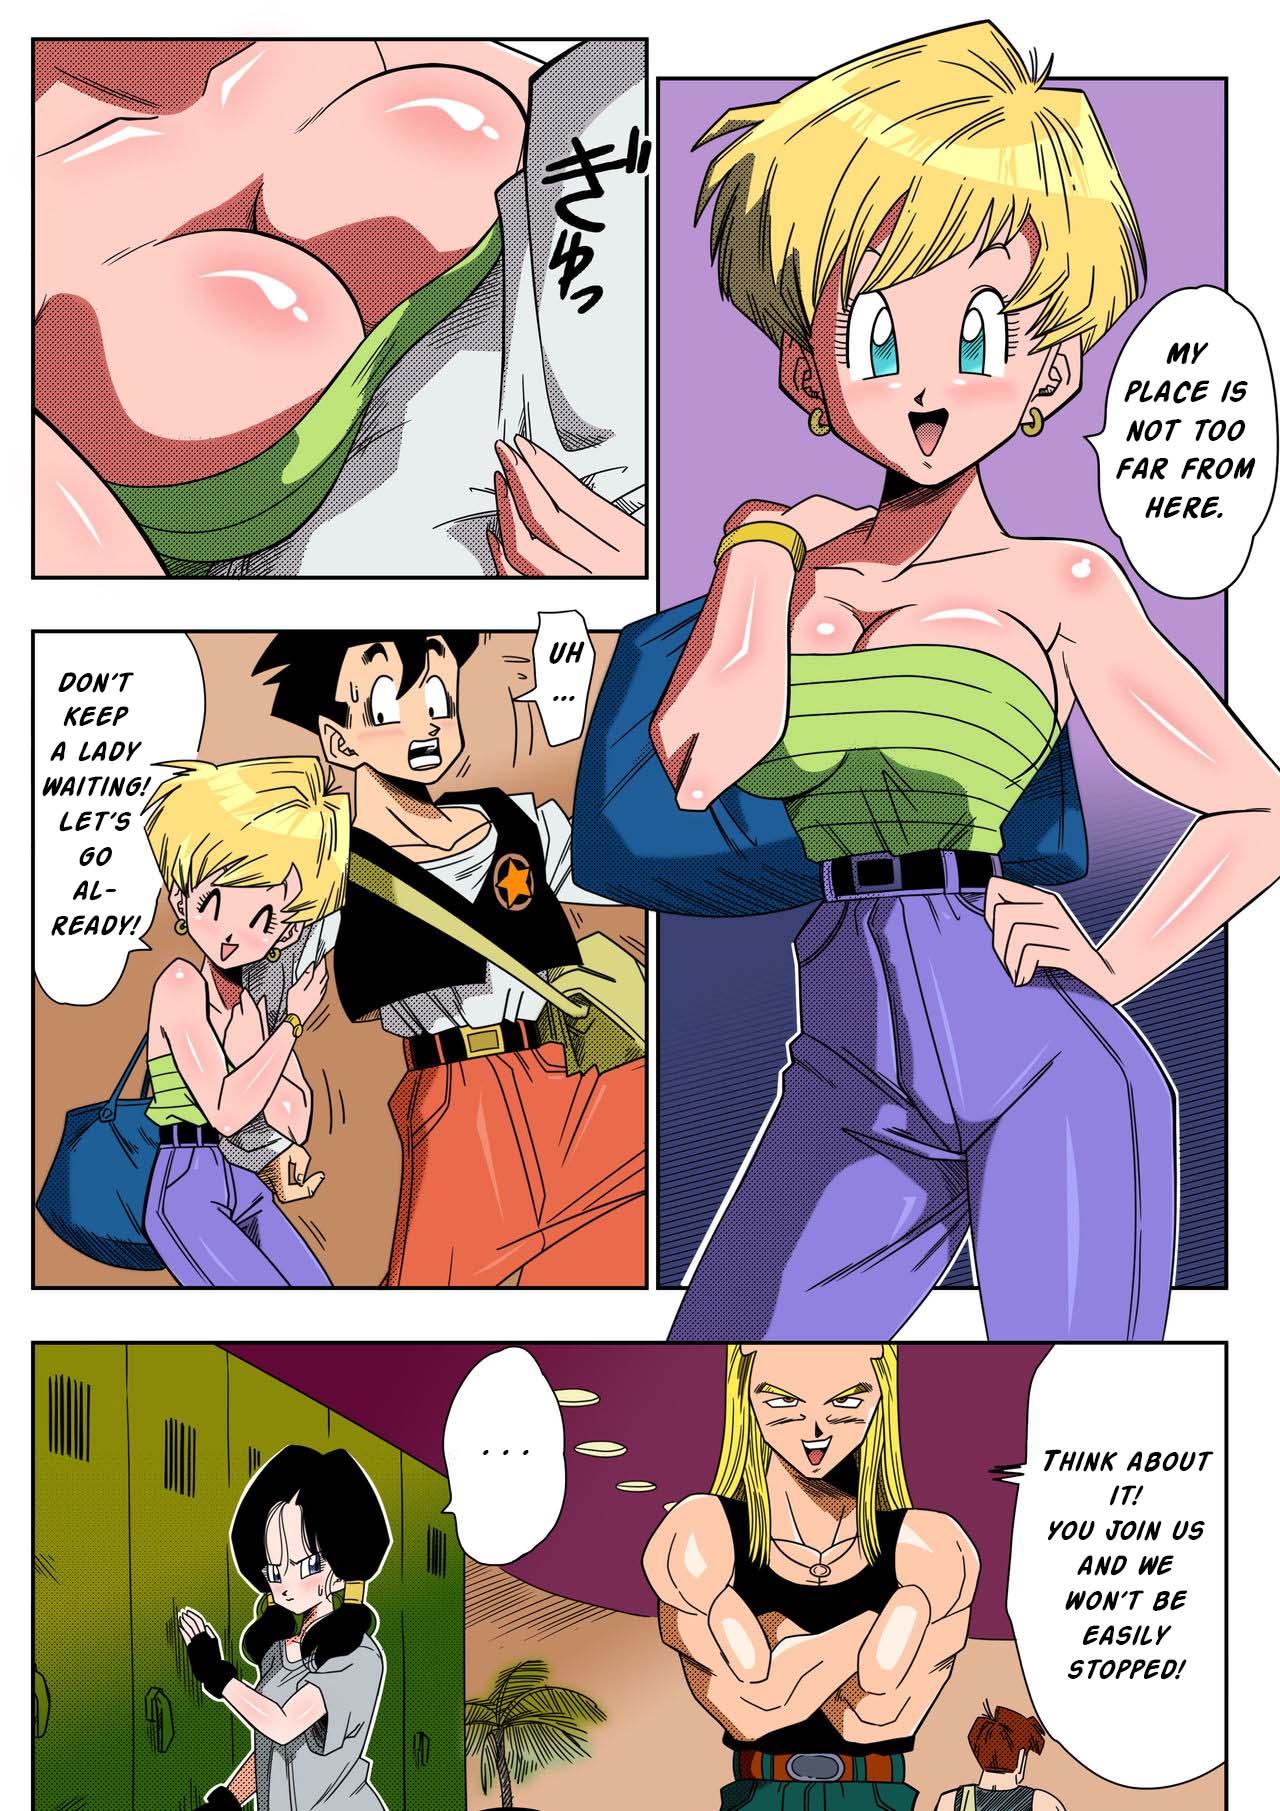 Whores LOVE TRIANGLE Z Part 1-4 - Dragon ball z Costume - Page 5